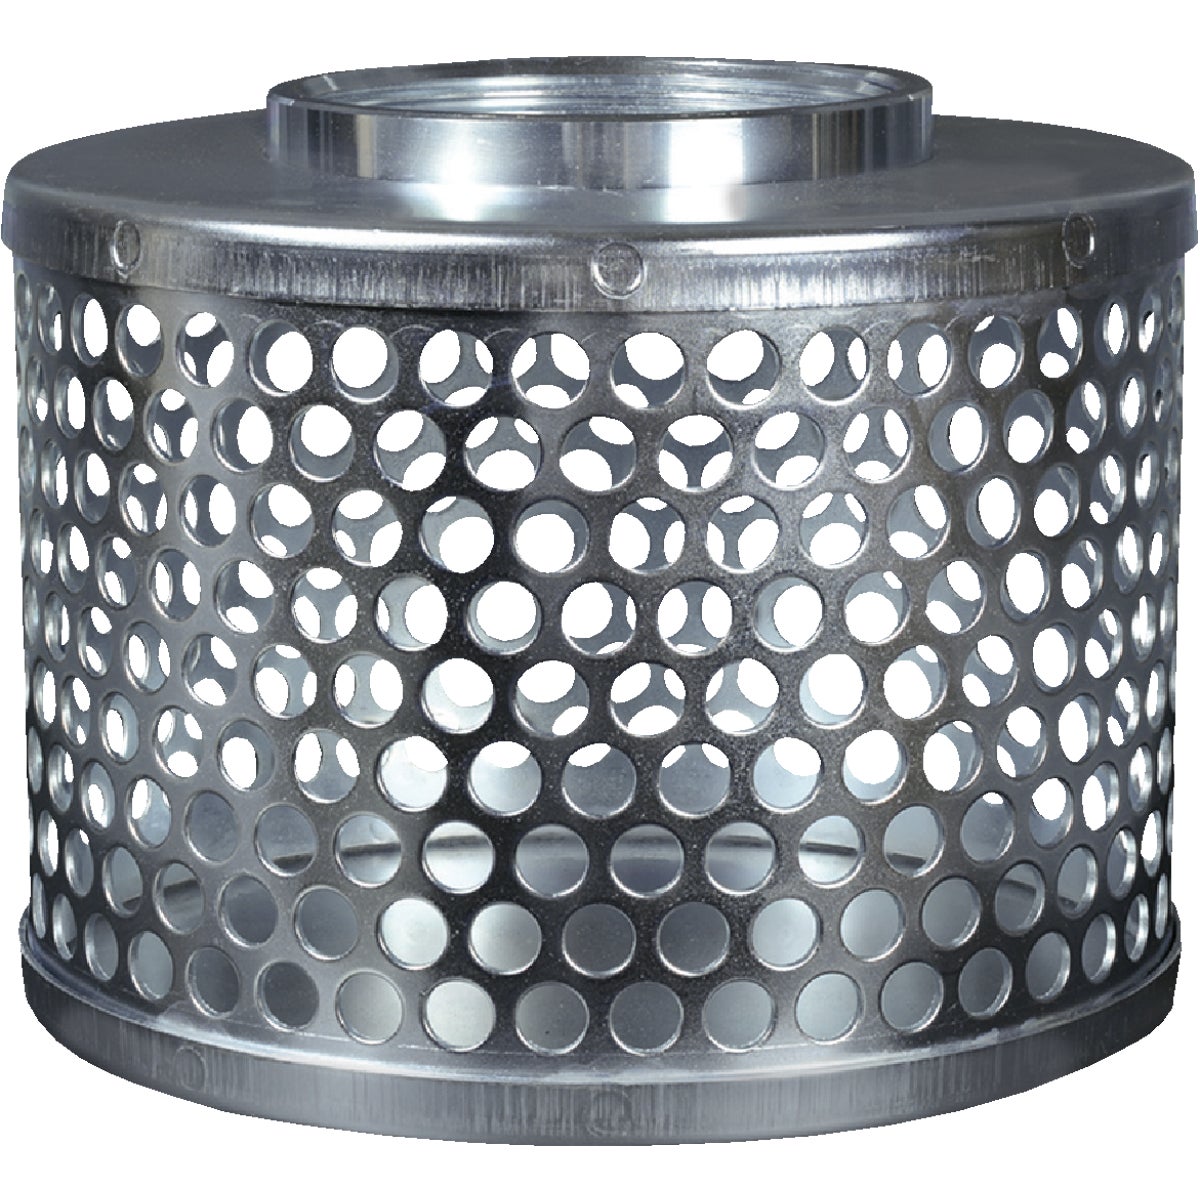 Apache 1-1/2 In. ID Plated Steel Suction Hose Strainer